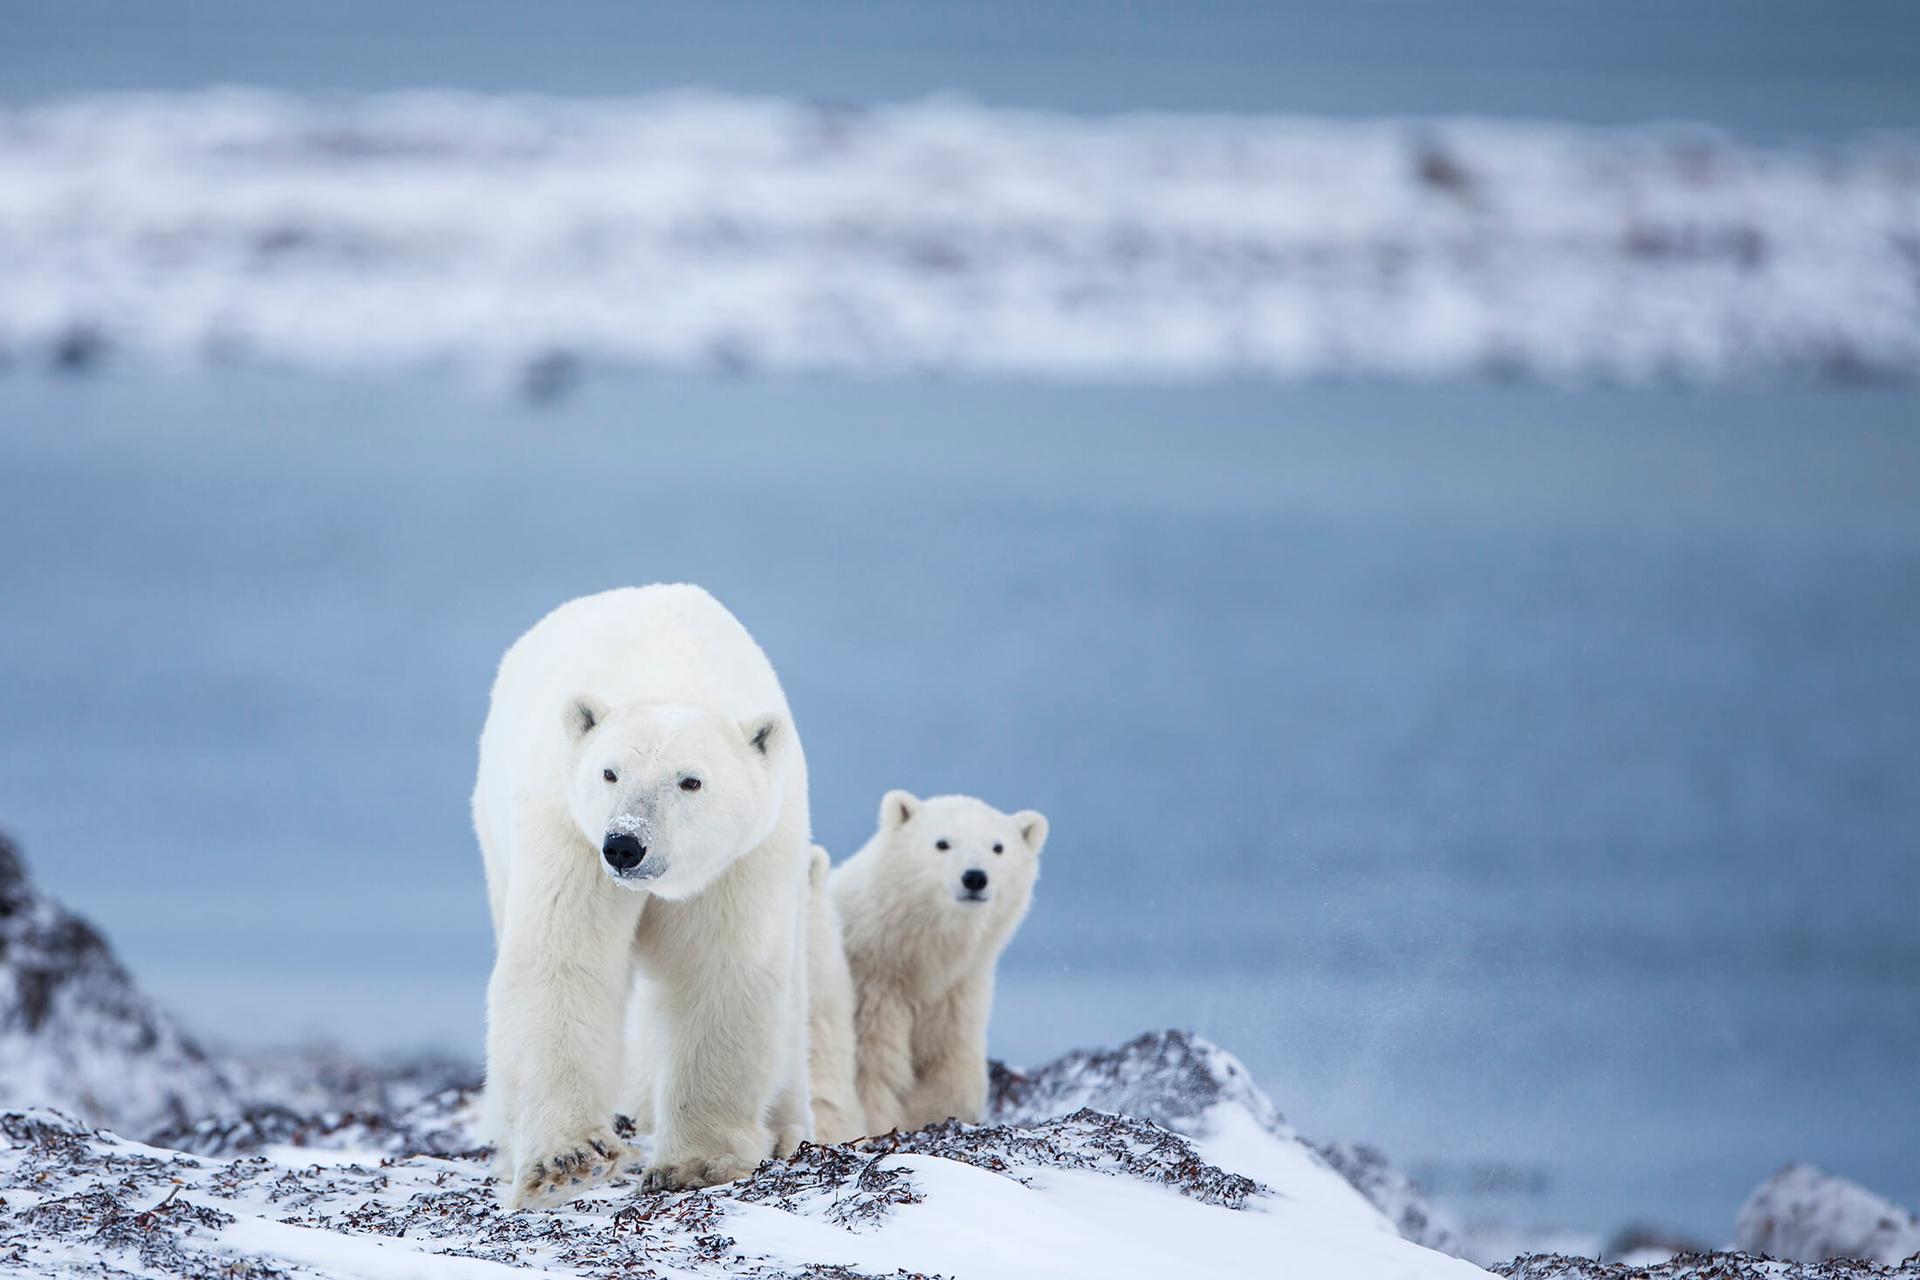 Two polar bears stand on the rock near the water